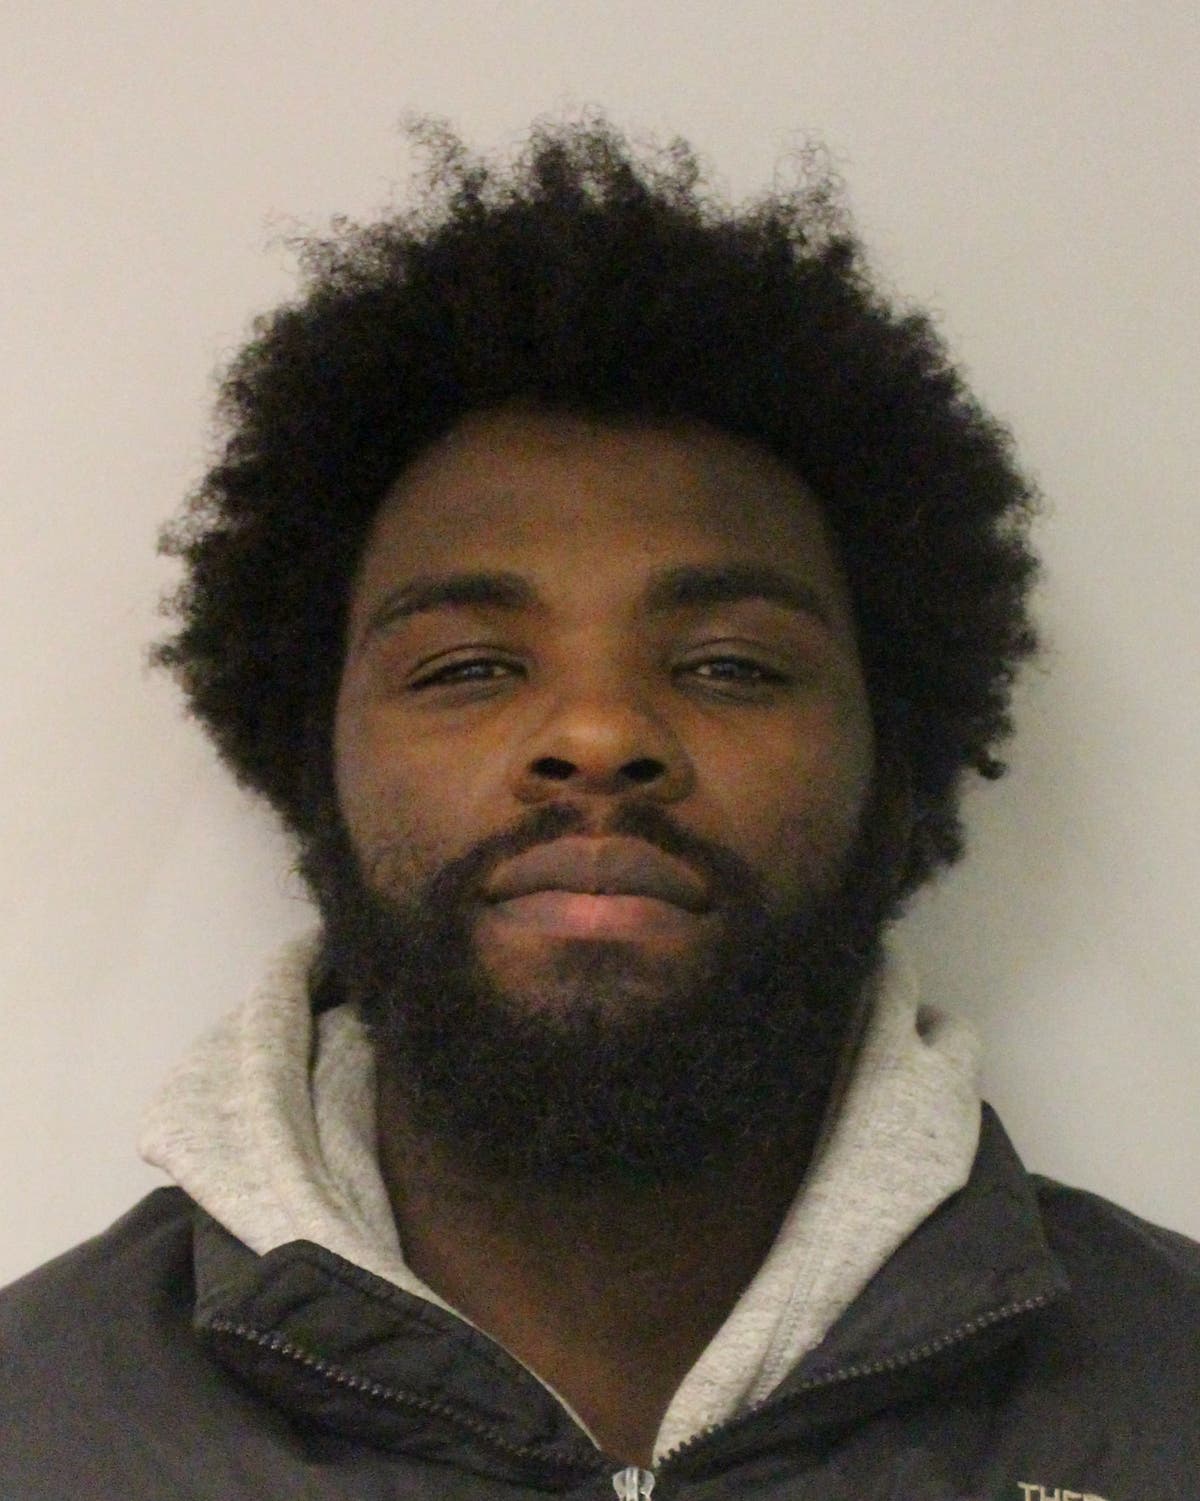 Man jailed after stabbing woman 10 times at her Camden flat after she asked him to leave